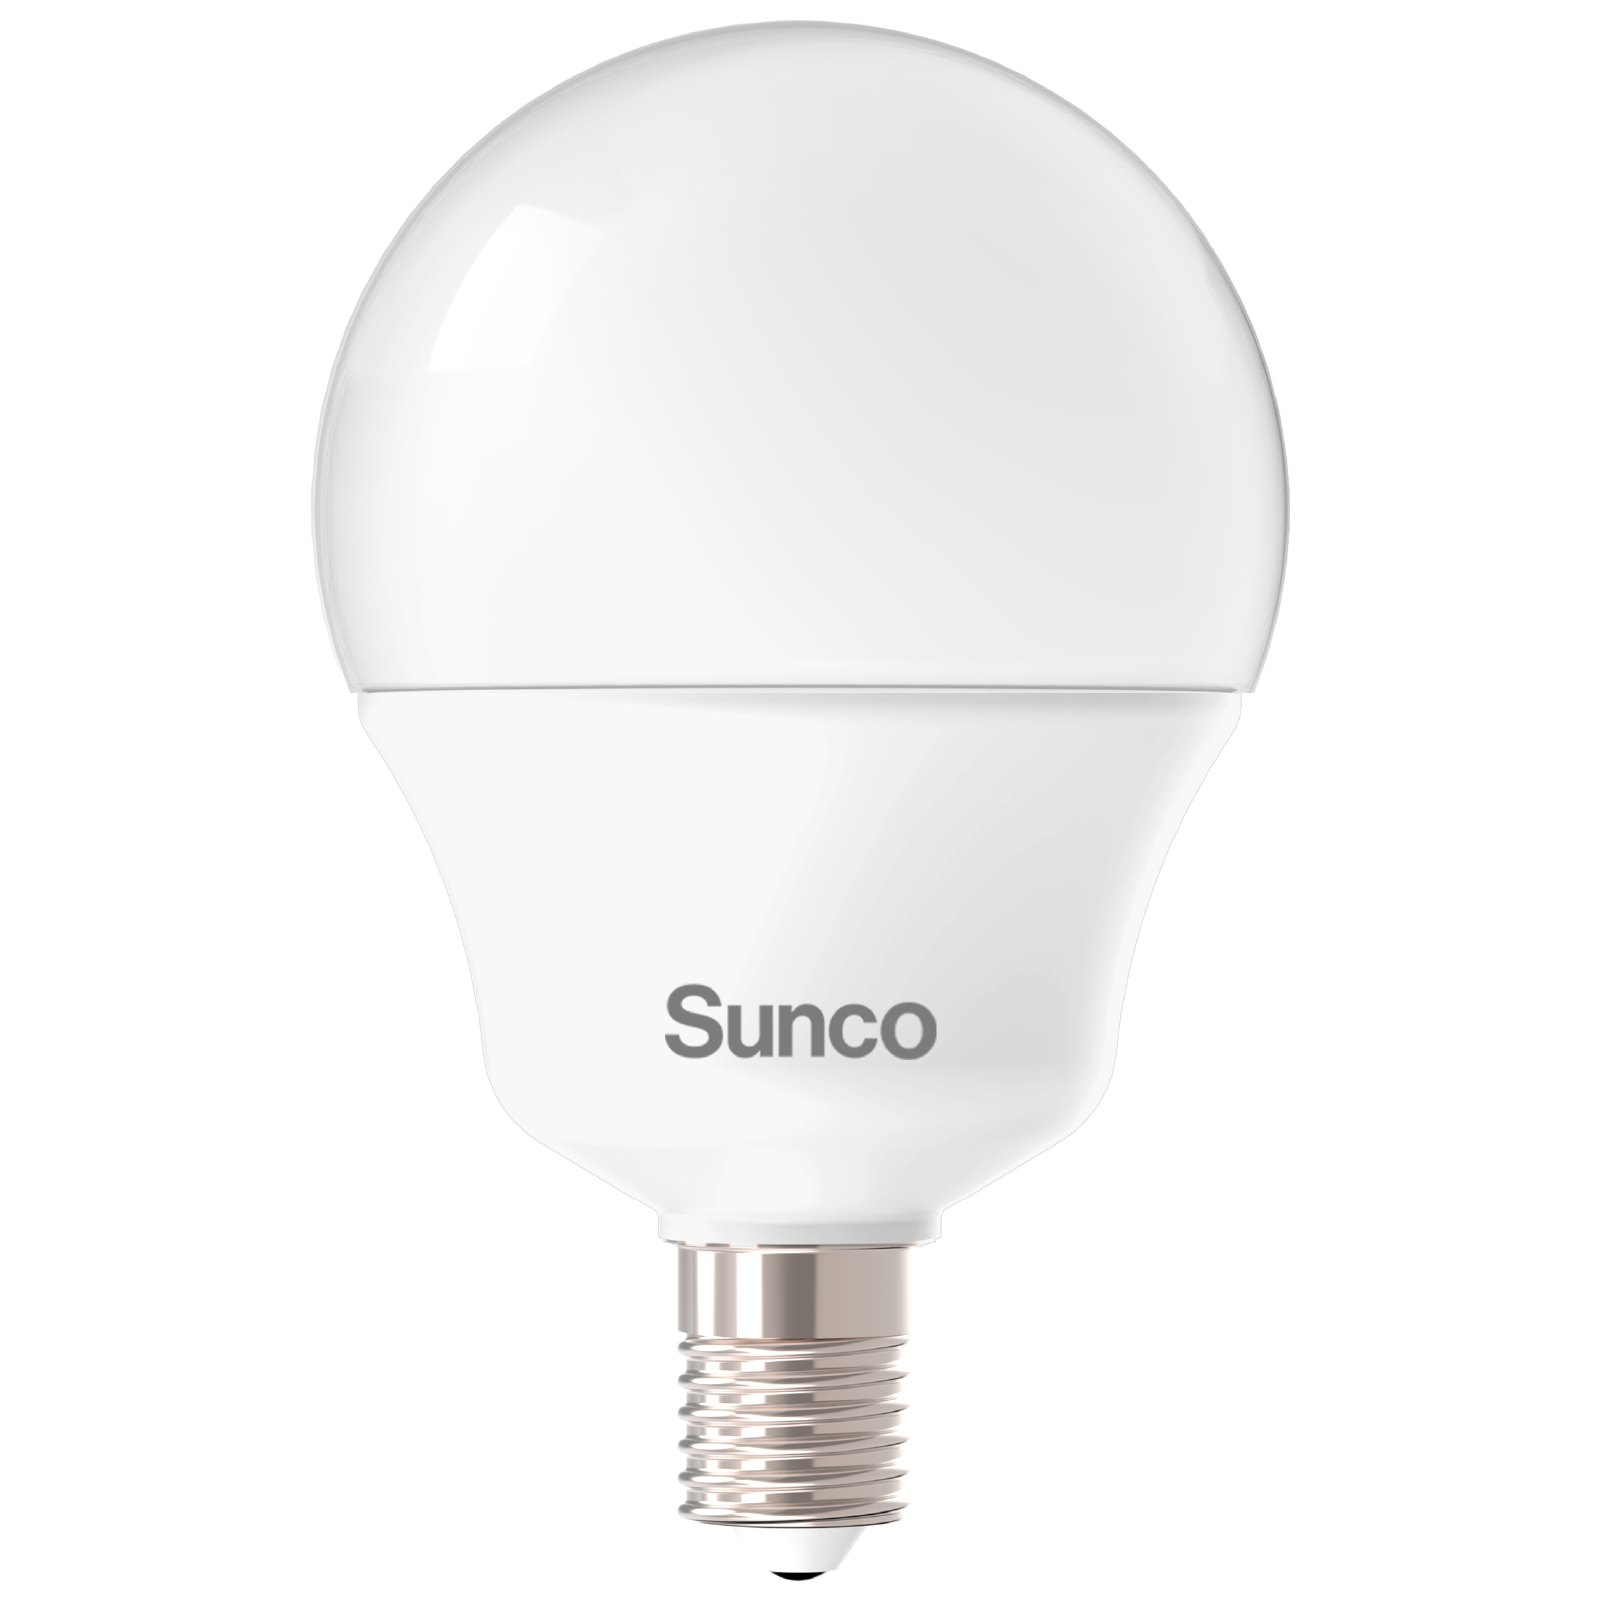 The Sunco G14 LED Bulb is a decorative, candelabra base bulb with a small Edison screw base E12 and a frosted, durable housing. This UL listed light bulb with a globe shape fits well in vanities, pendant lamps, and other fixtures with an E12 socket. This 5W bulb is a 40W equivalent. The bulb is damp rated for indoor applications.